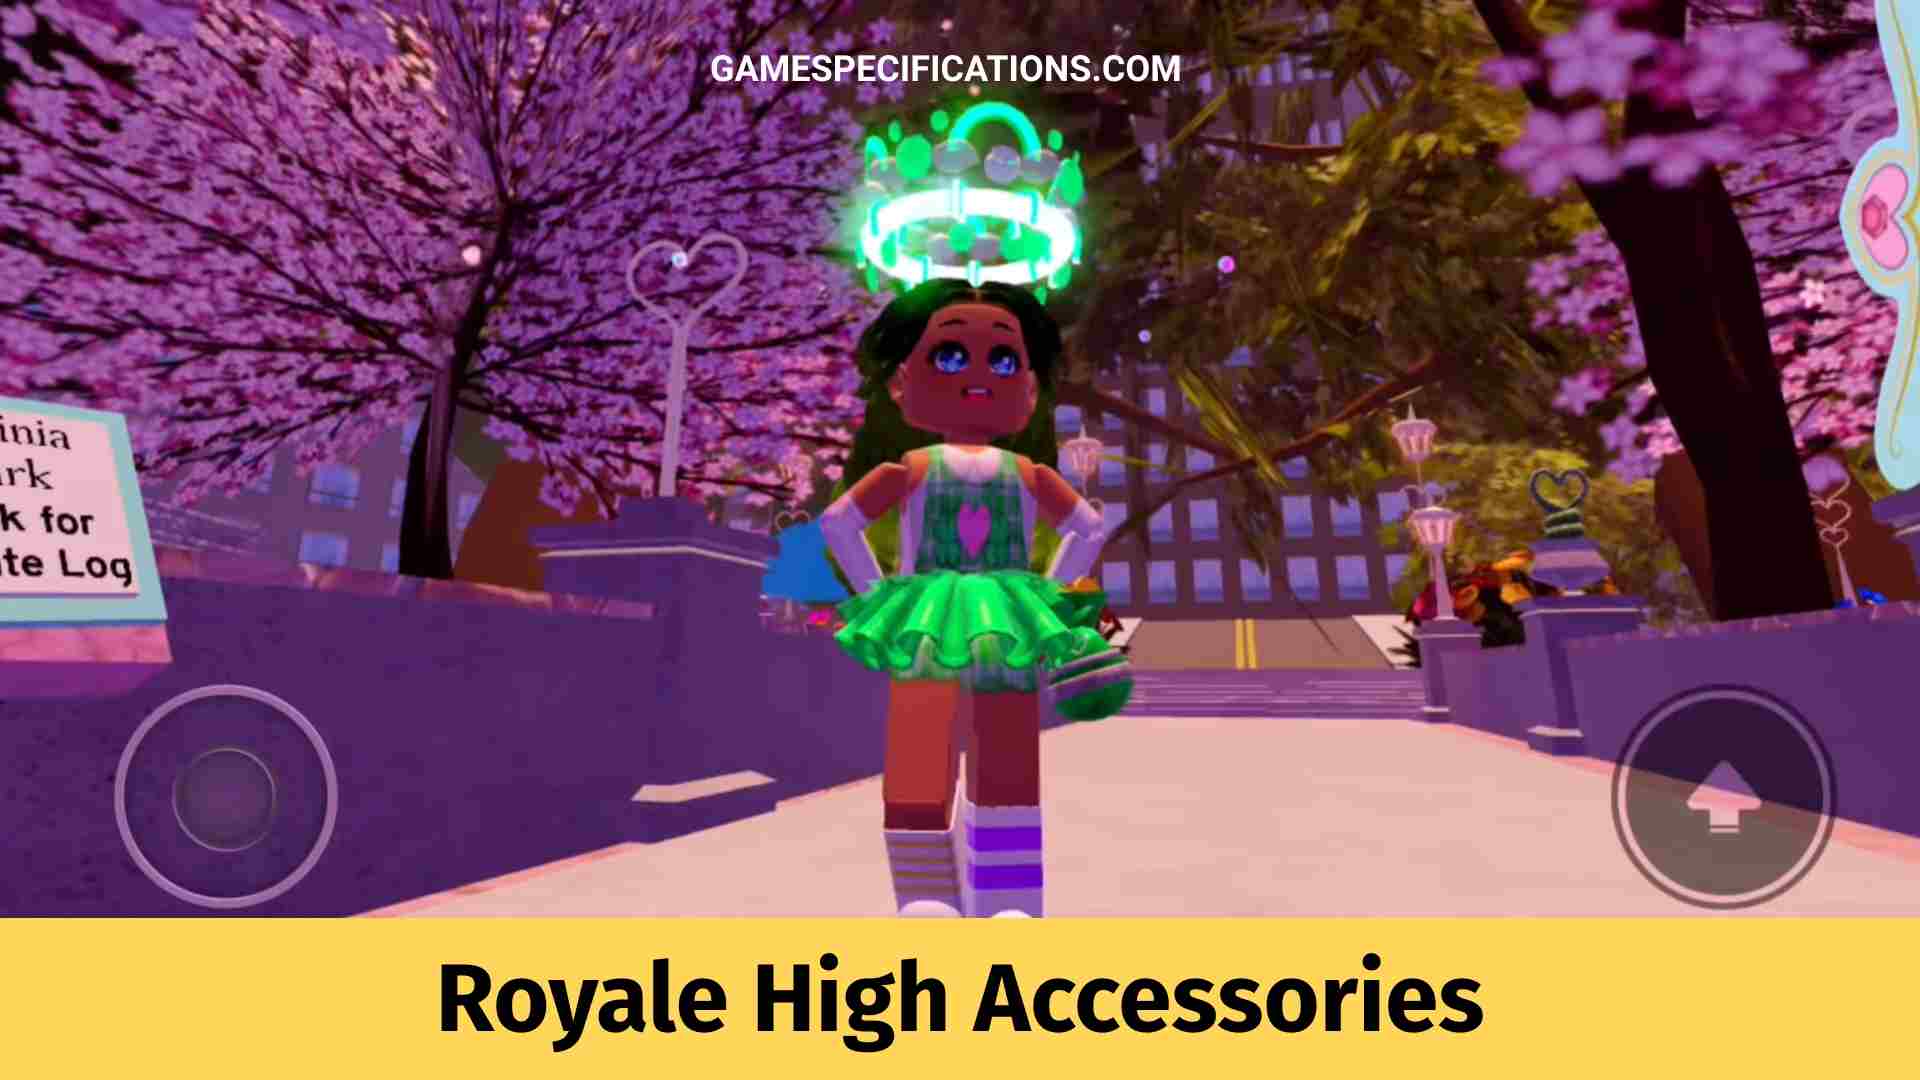 21 Underrated Royale High Accessories For Aesthetic Gamers Game Specifications - aesthetic roblox back accessories